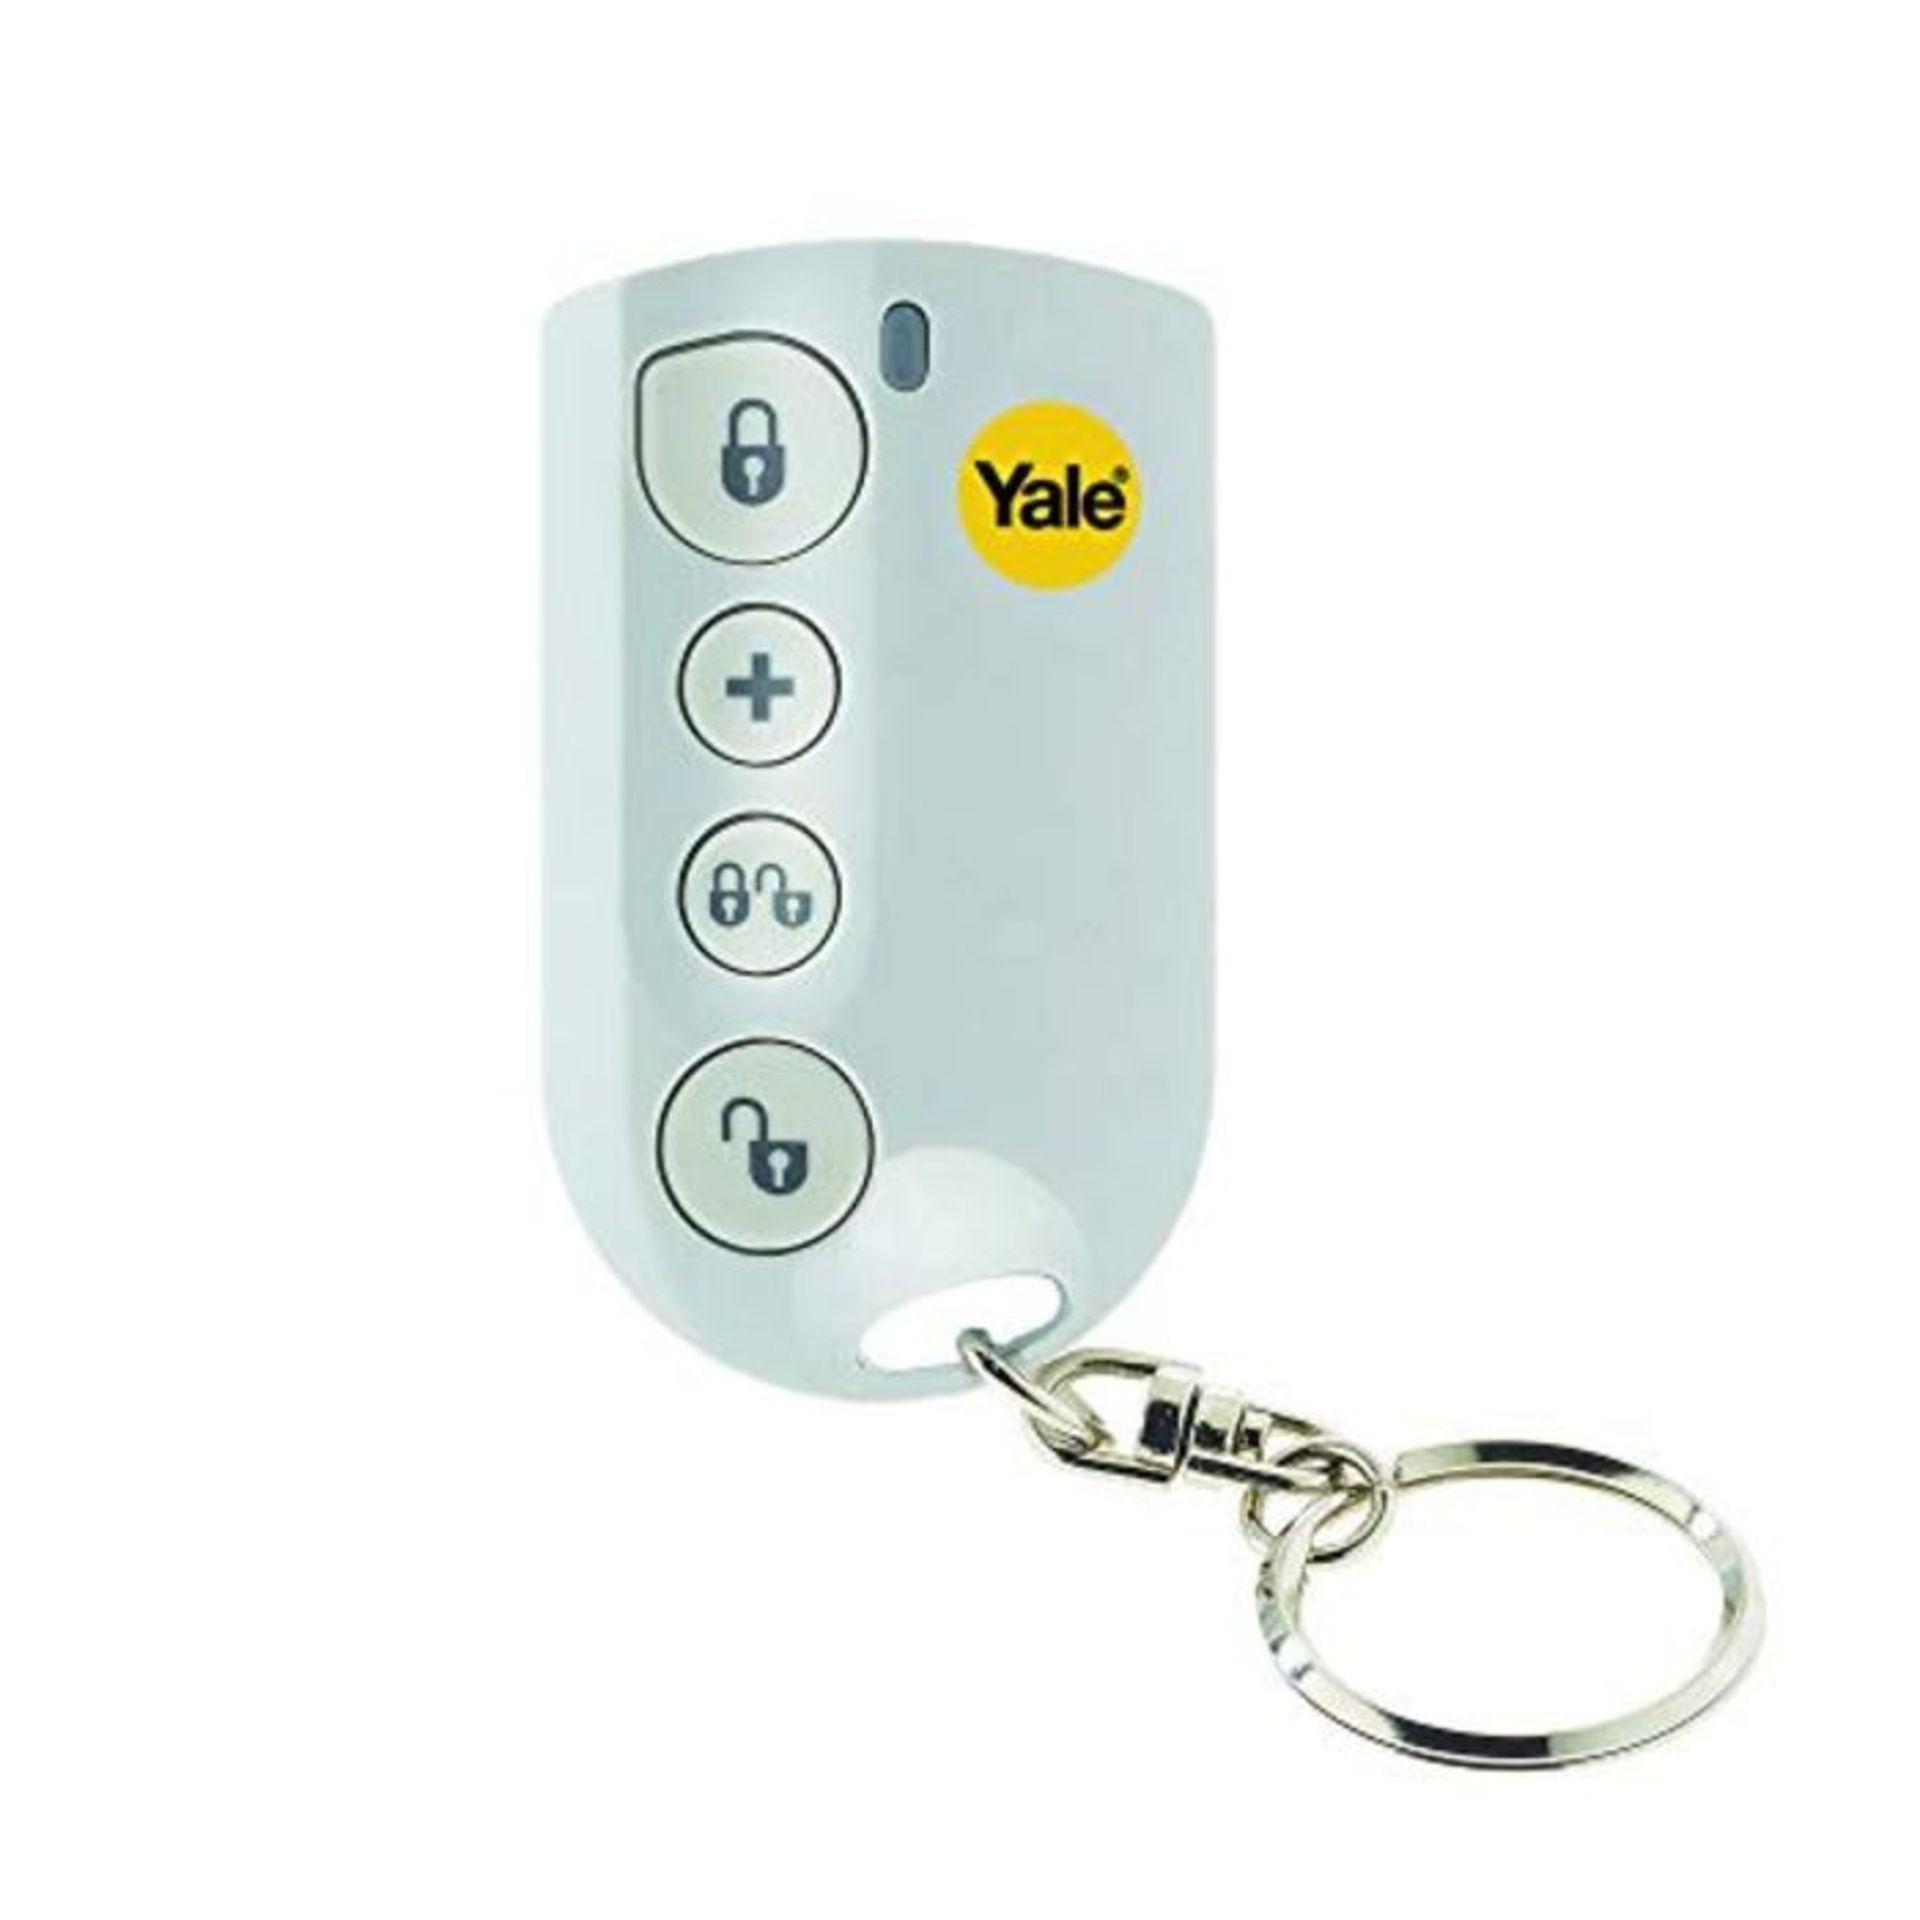 Yale B-HSA6060 Alarm Accessory Remote Keyfob, Works with HSA Alarms Including YES-ALAR